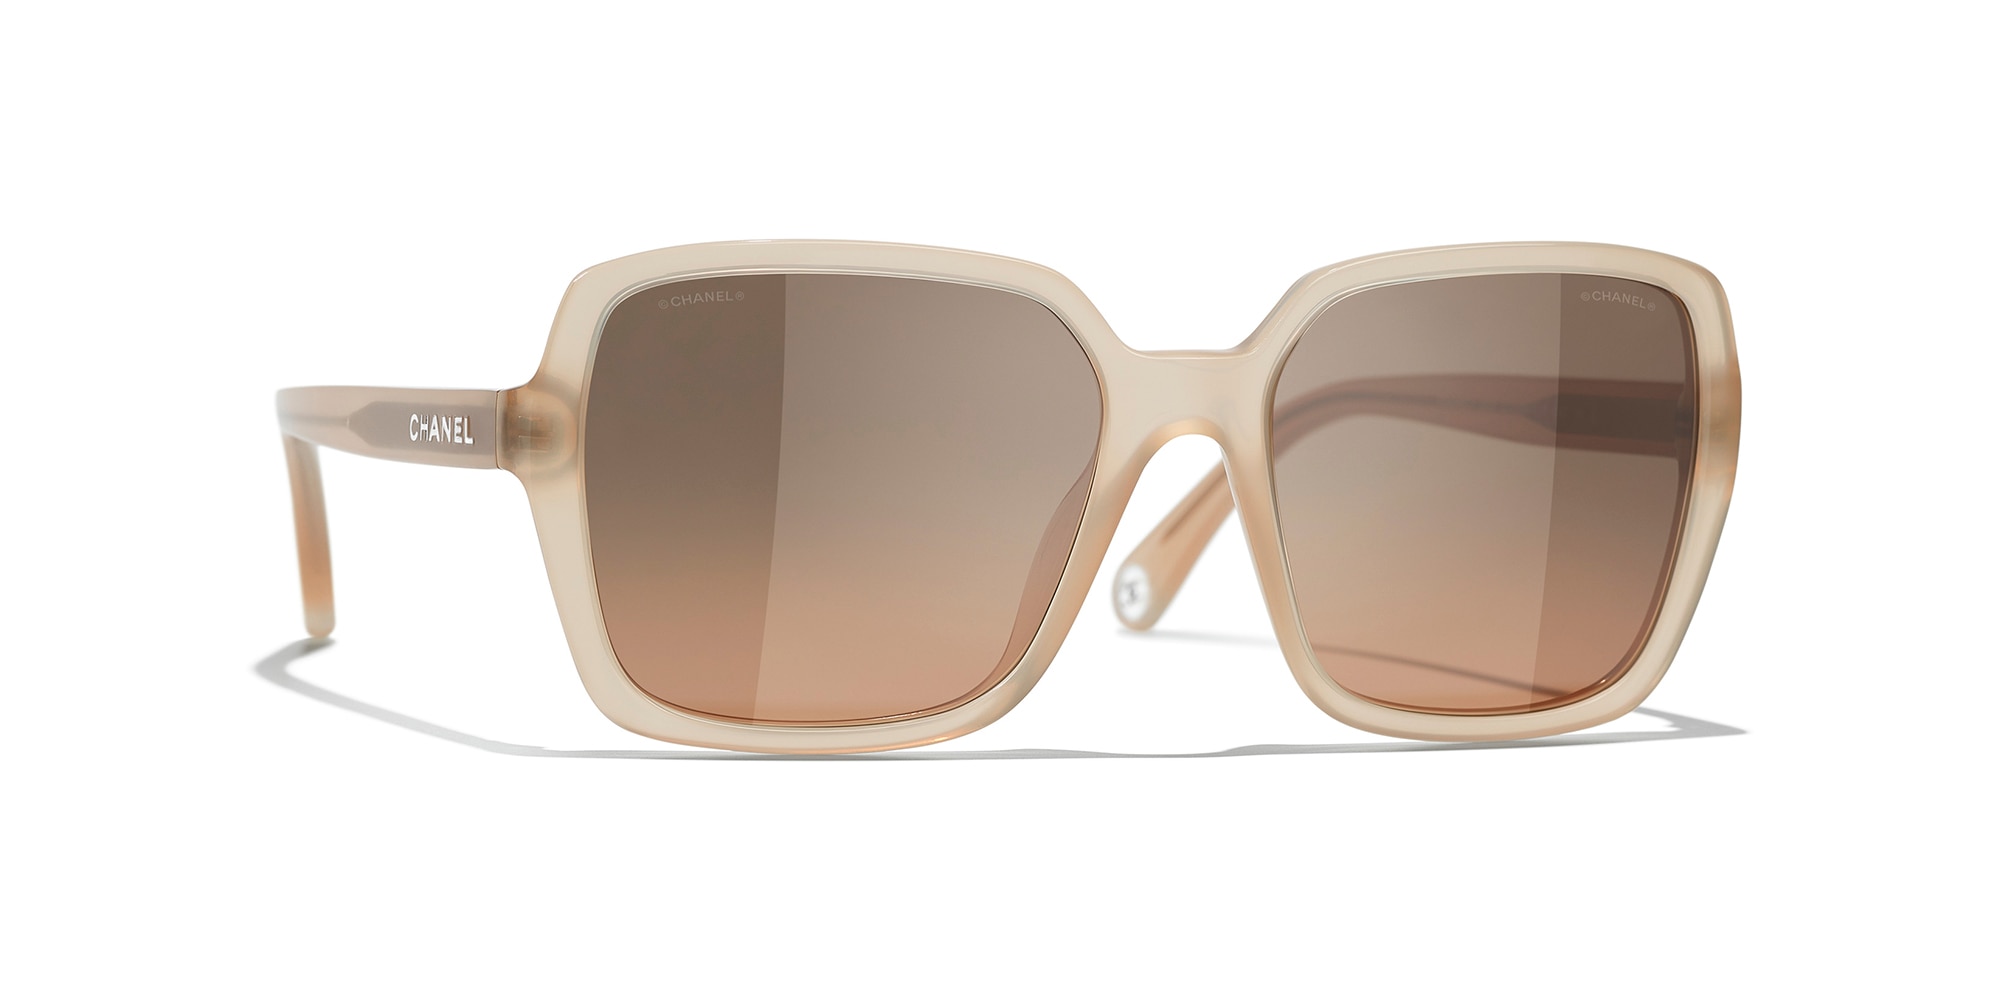 Sunglass Hut Welcomes Chanel Eyewear and New Summer Collection 